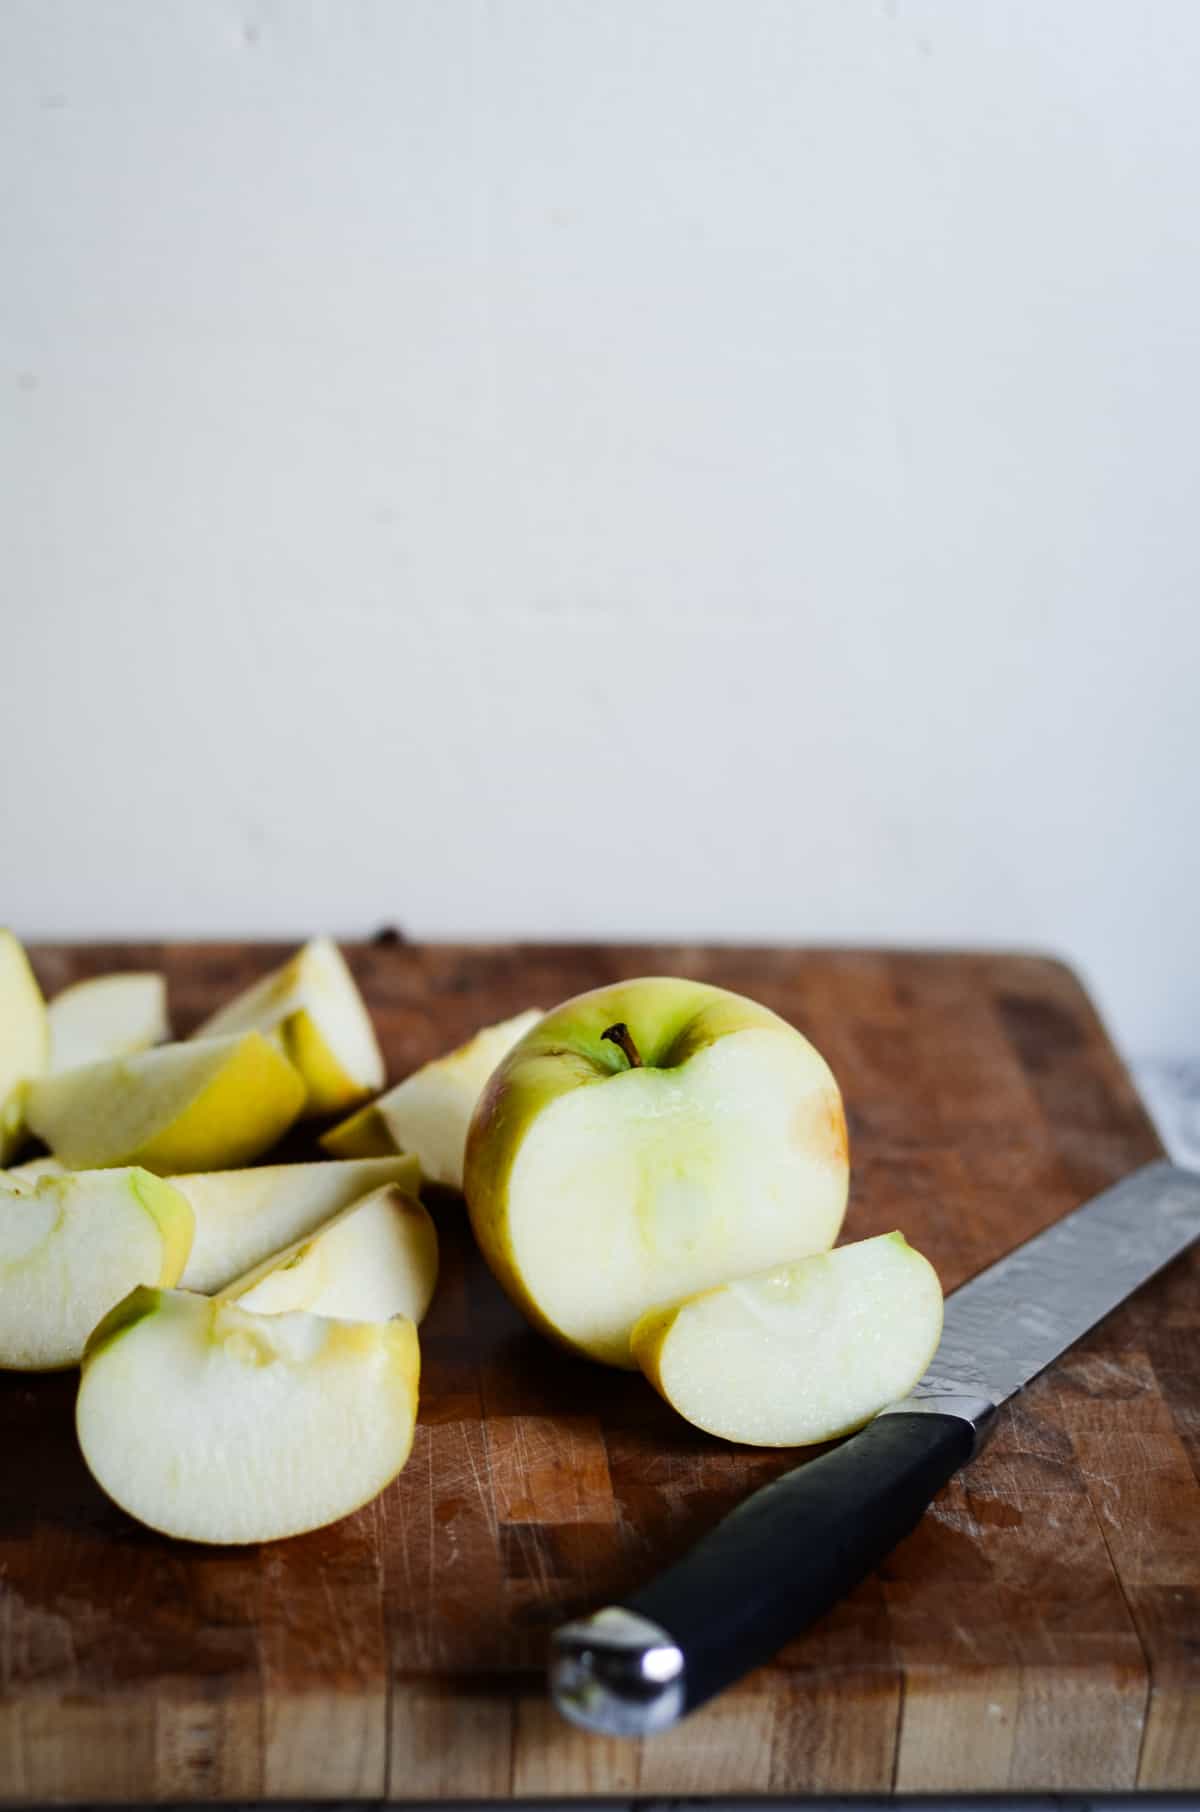 Apples being chopped on a wooden cutting board to freeze for a smoothie.